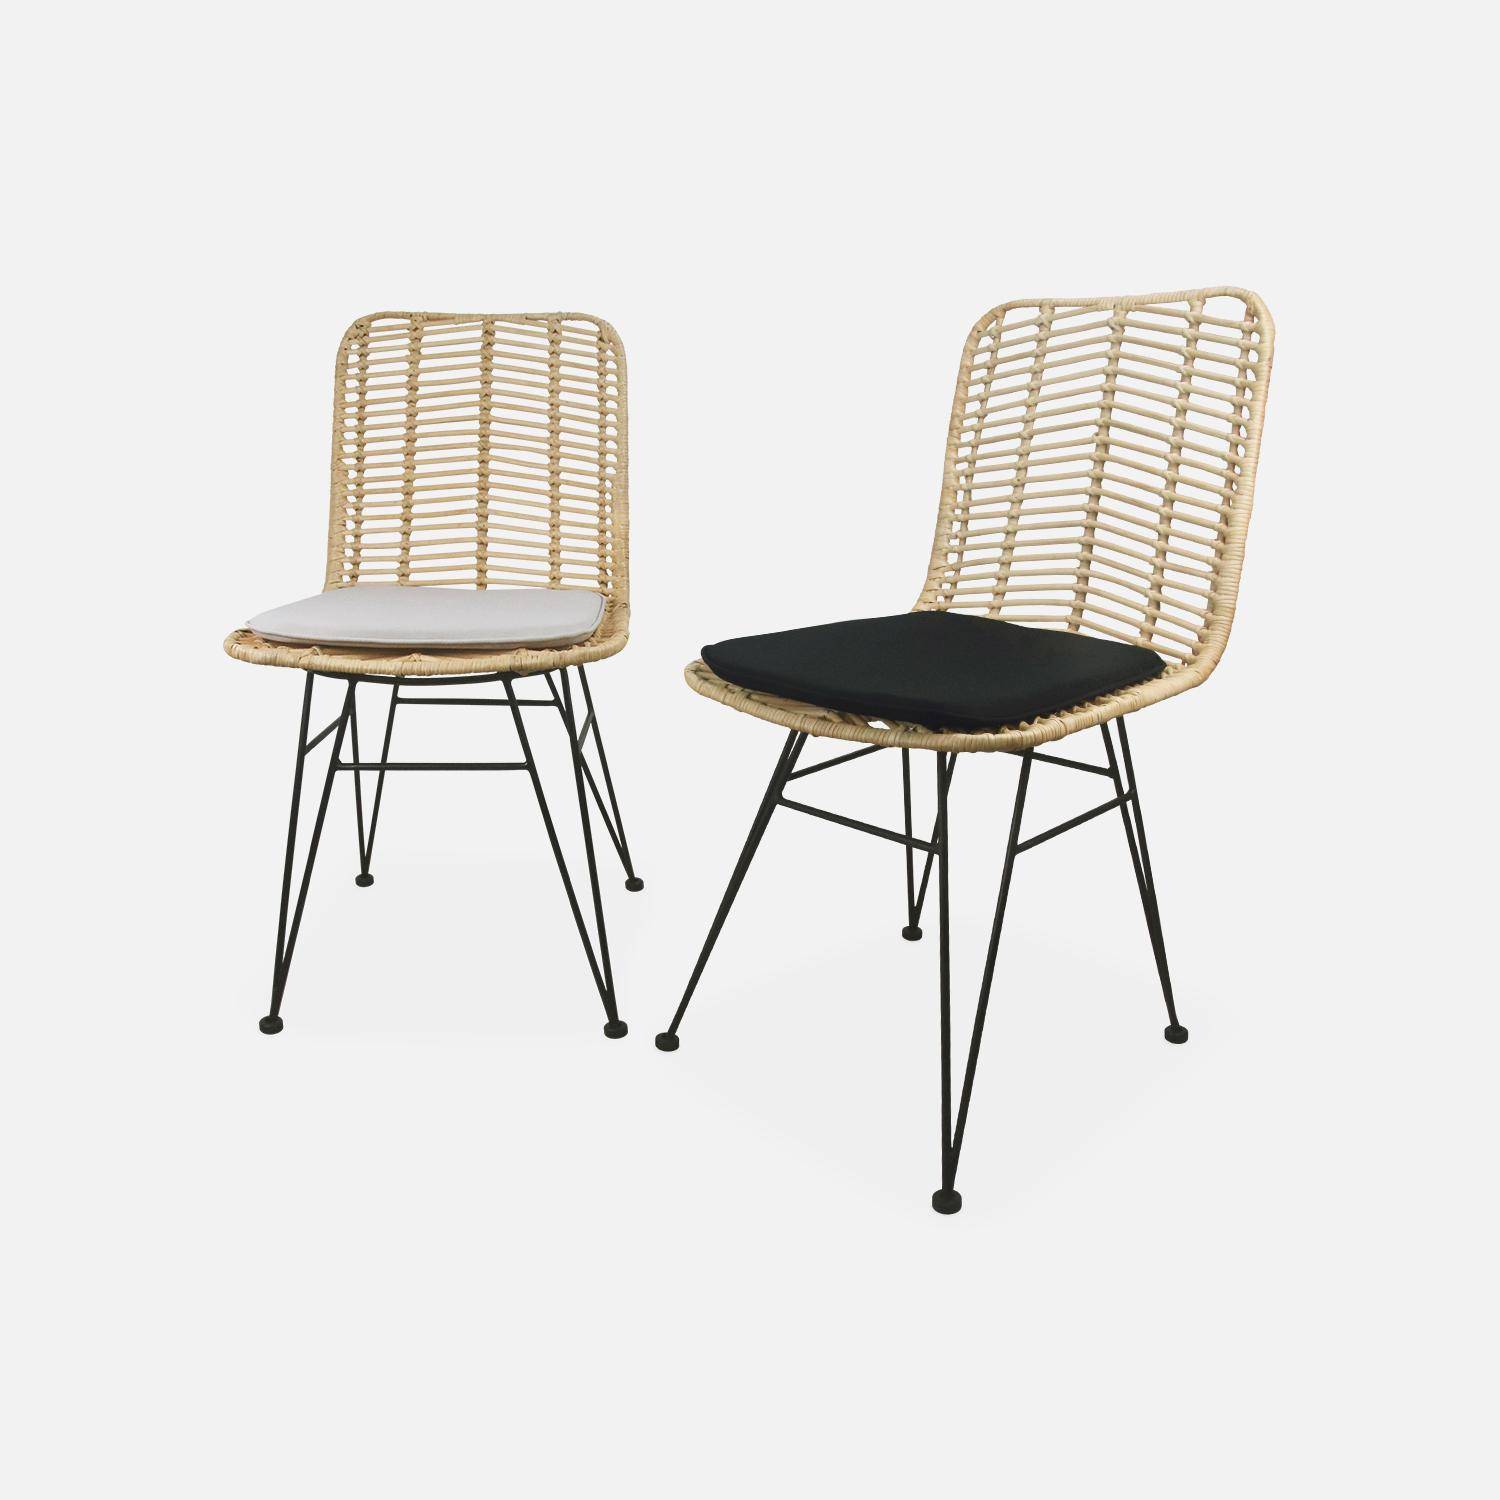 Pair of high-backed rattan dining chairs with metal legs and cushions - Cahya - Natural rattan, Black cushions Photo10